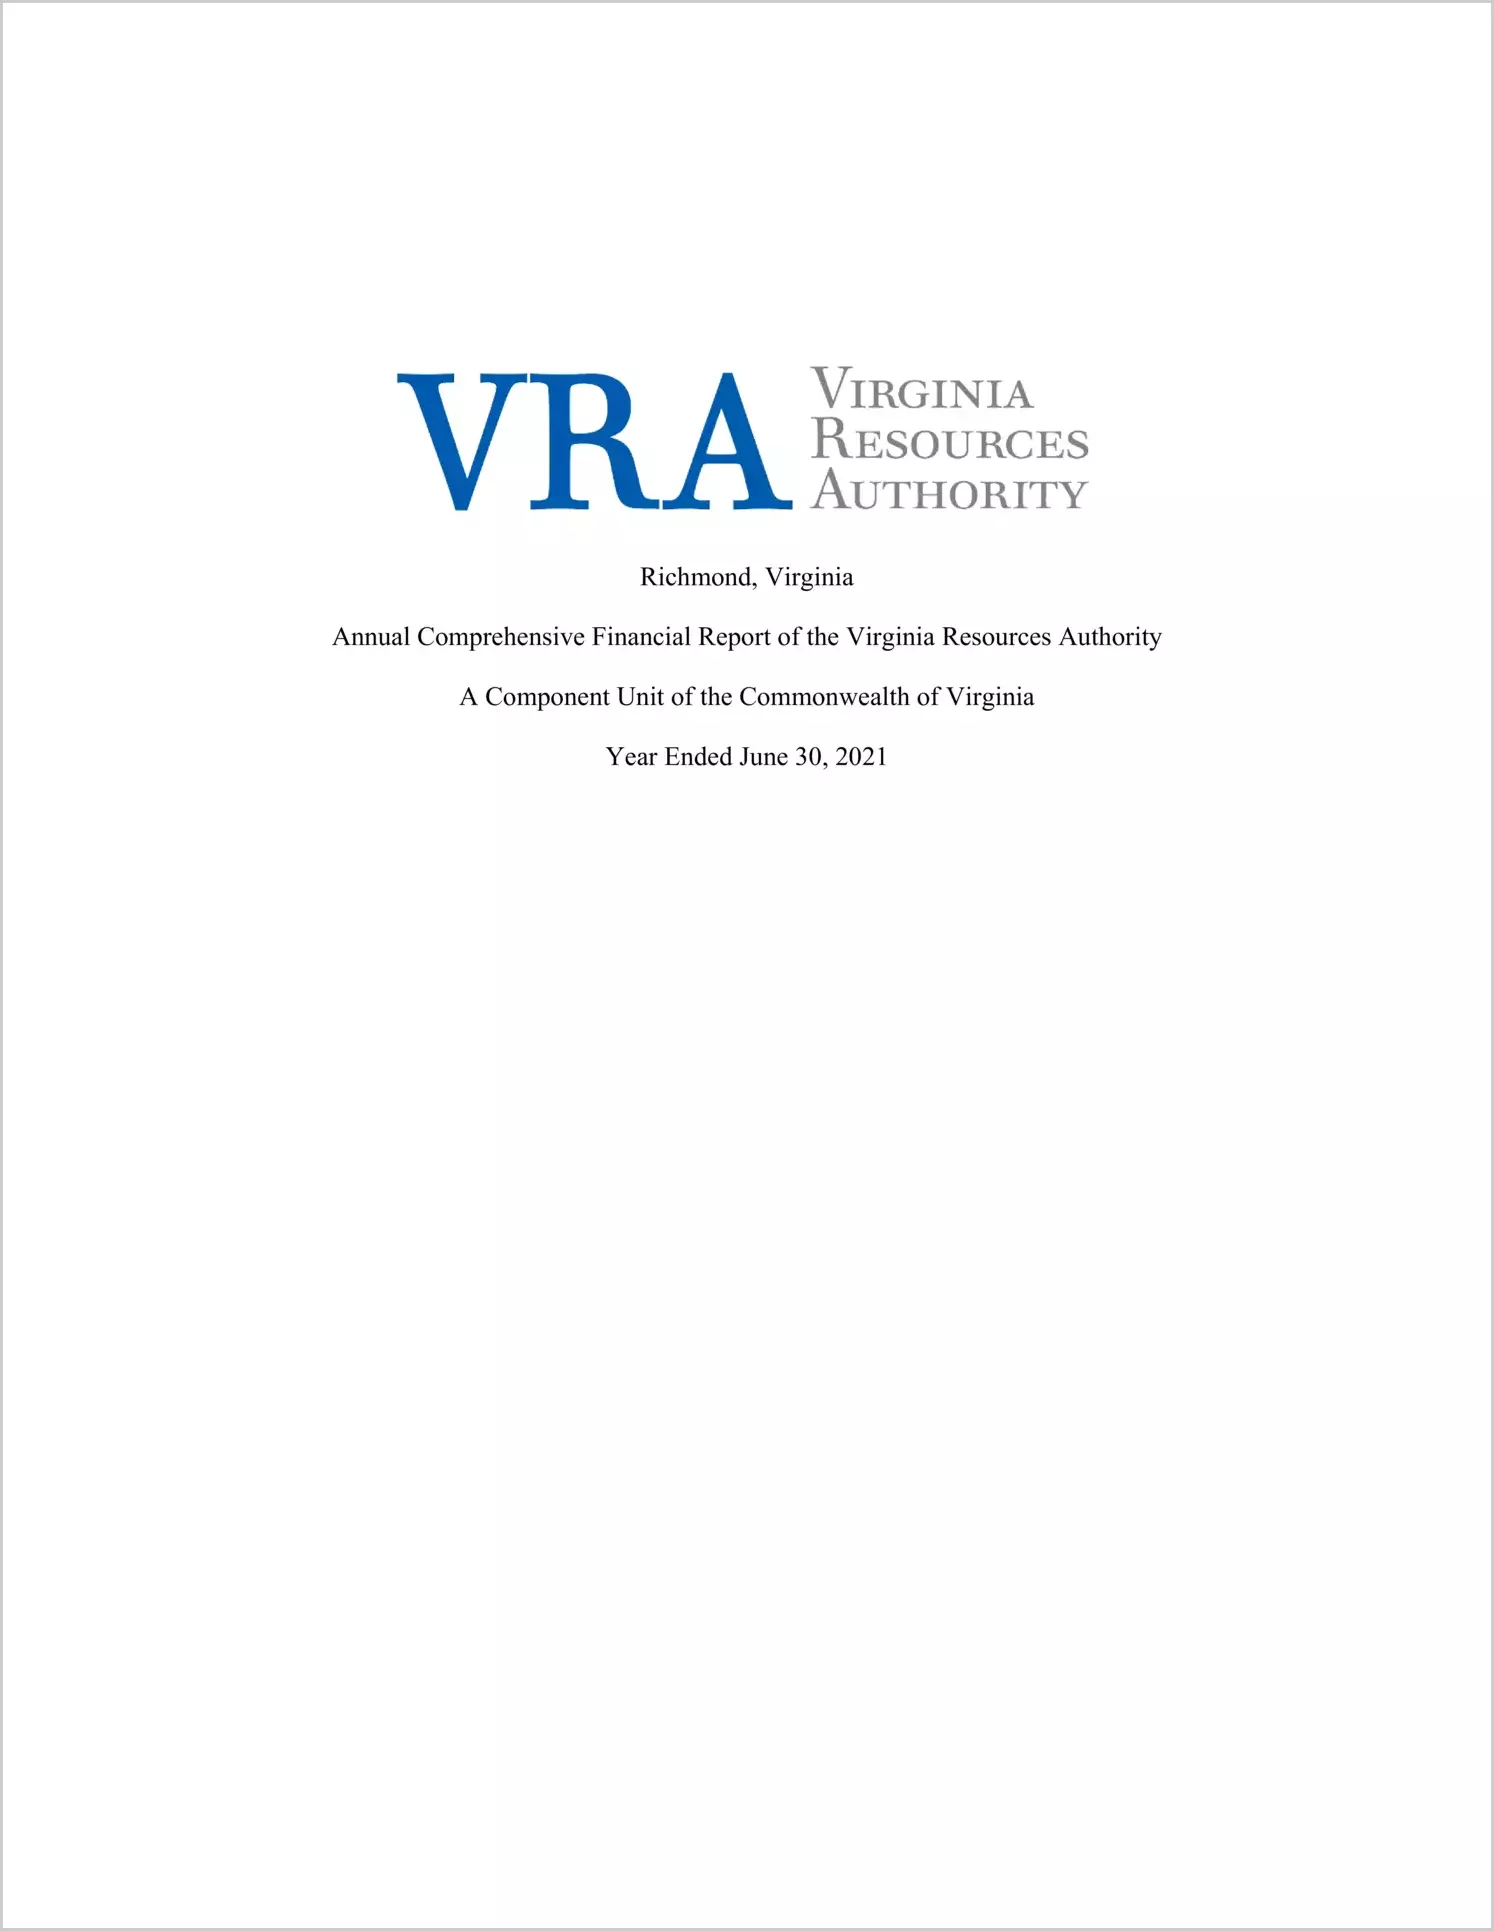 Virginia Resources Authority Financial Statements for the fiscal year ended June 30, 2021